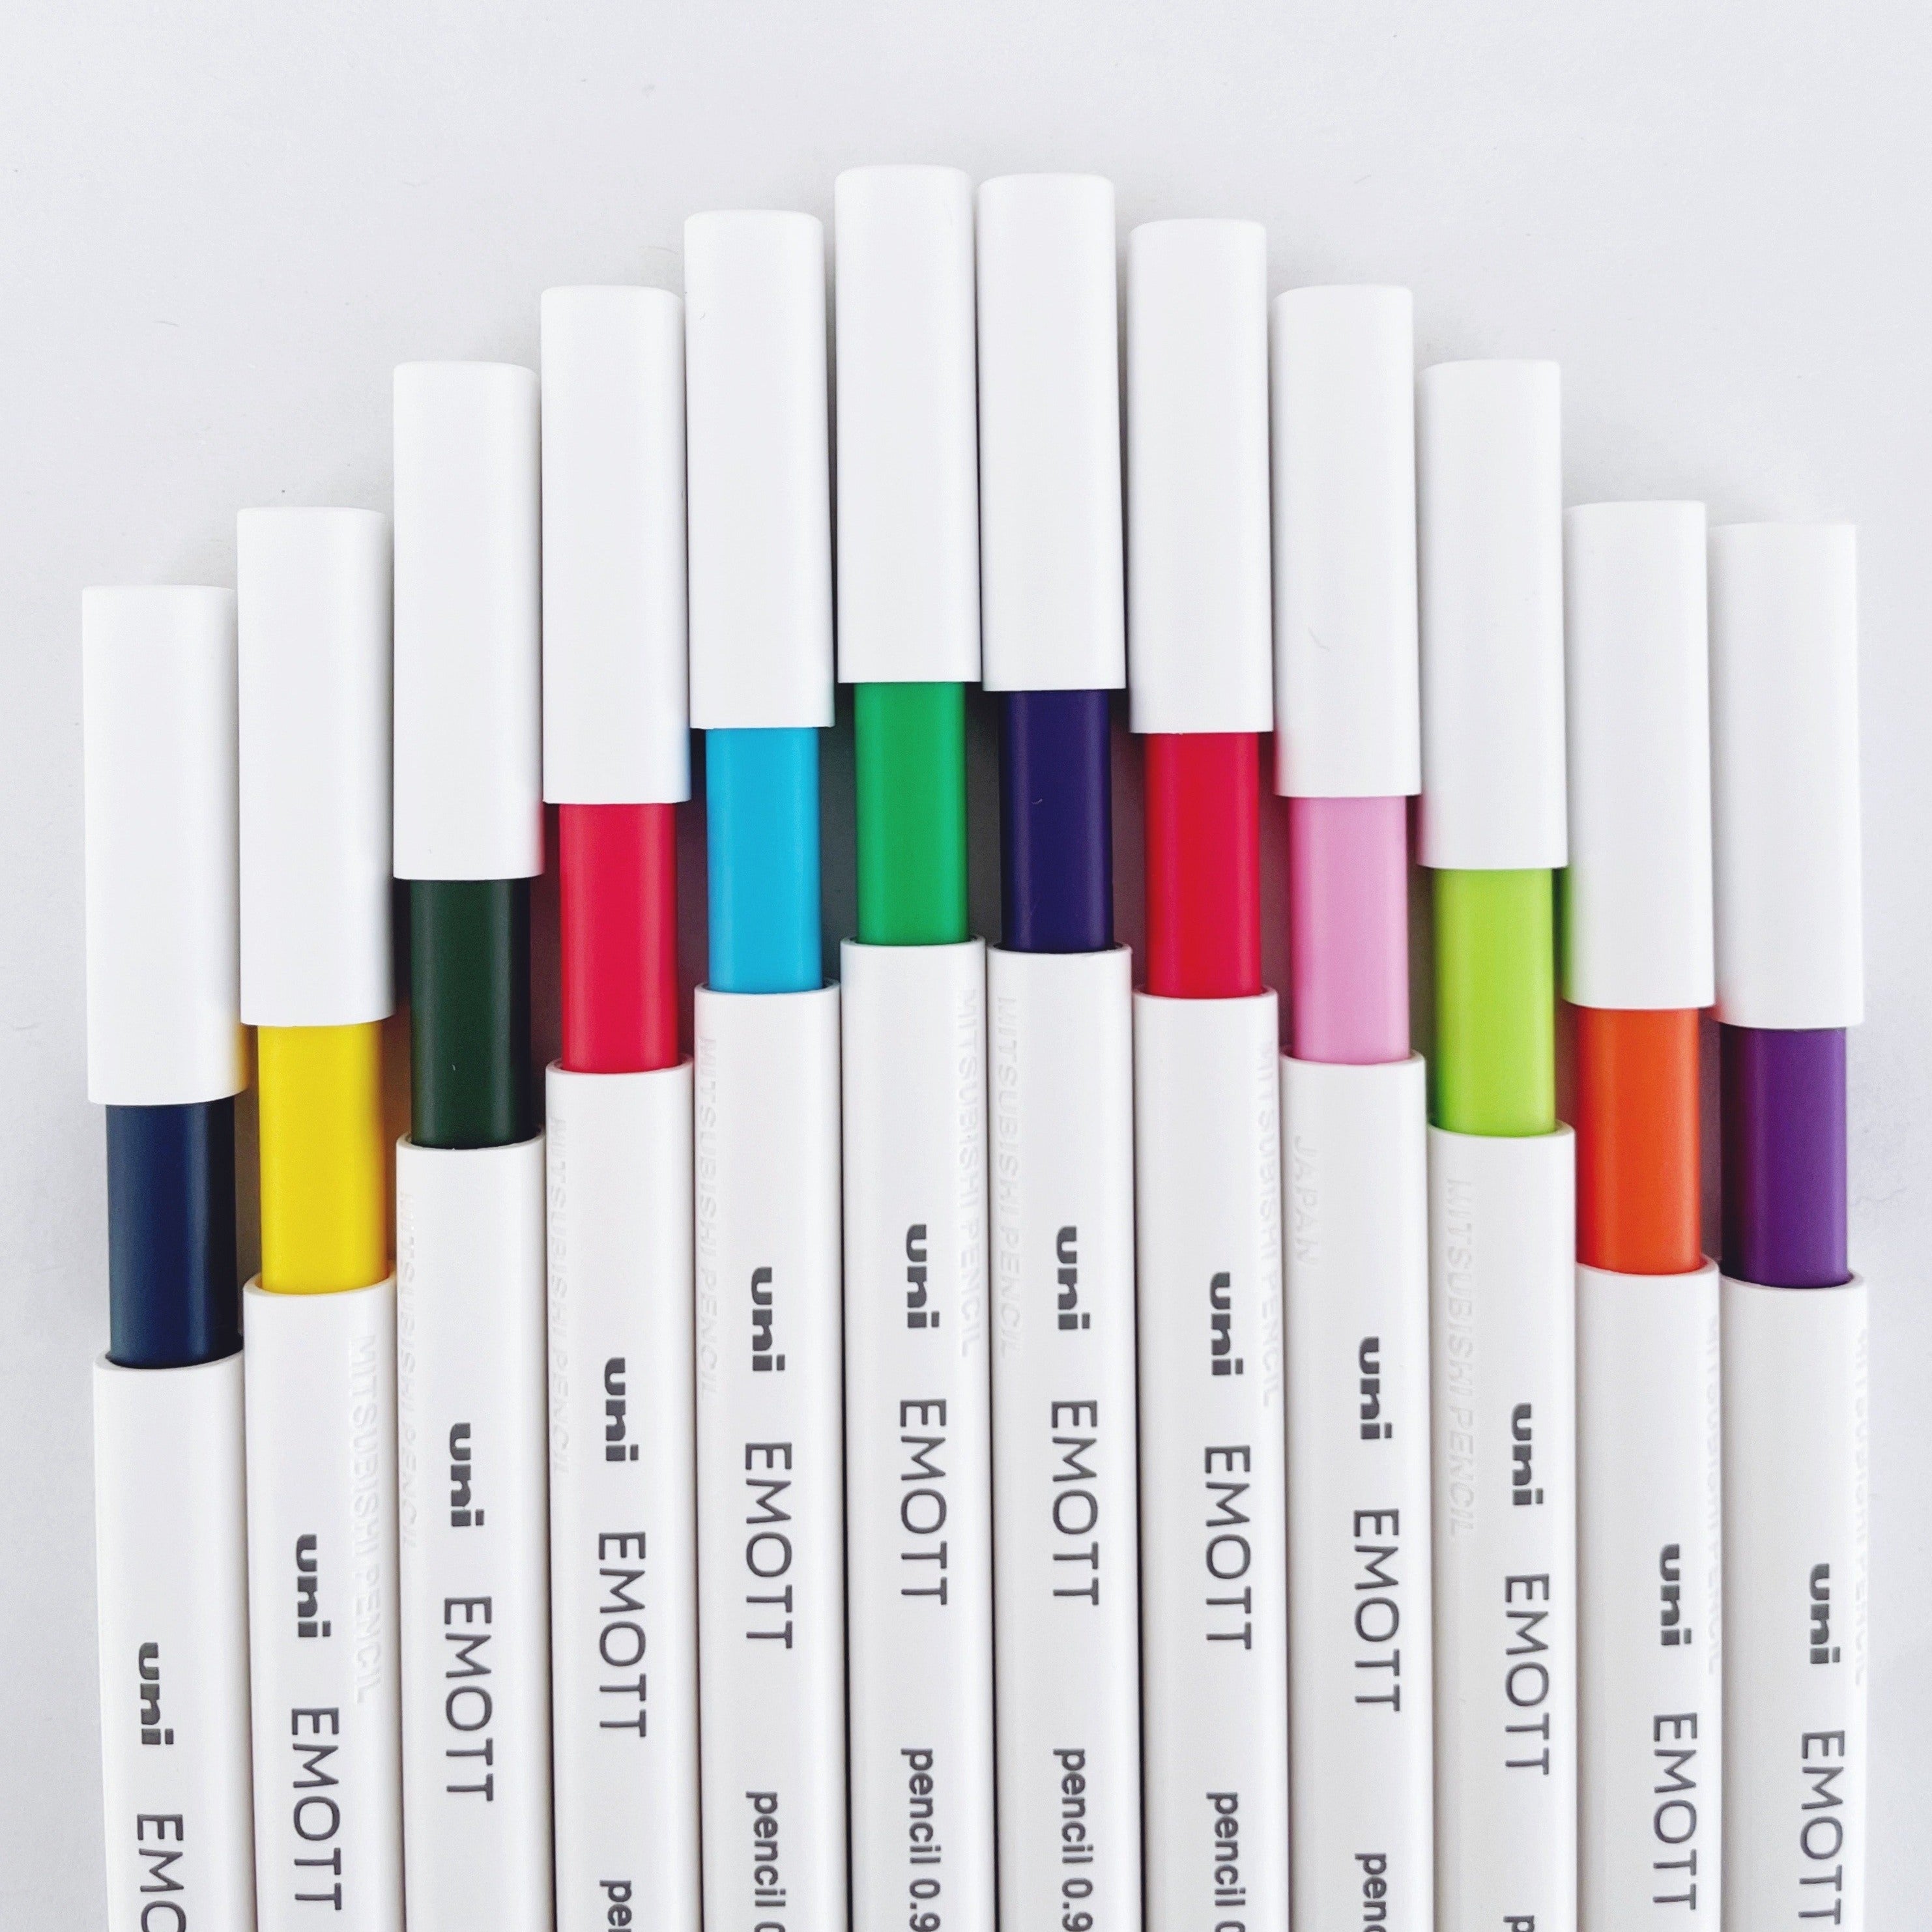 Colored Pencil Review: Uni EMOTT Color Mechanical Pencils - The  Well-Appointed Desk